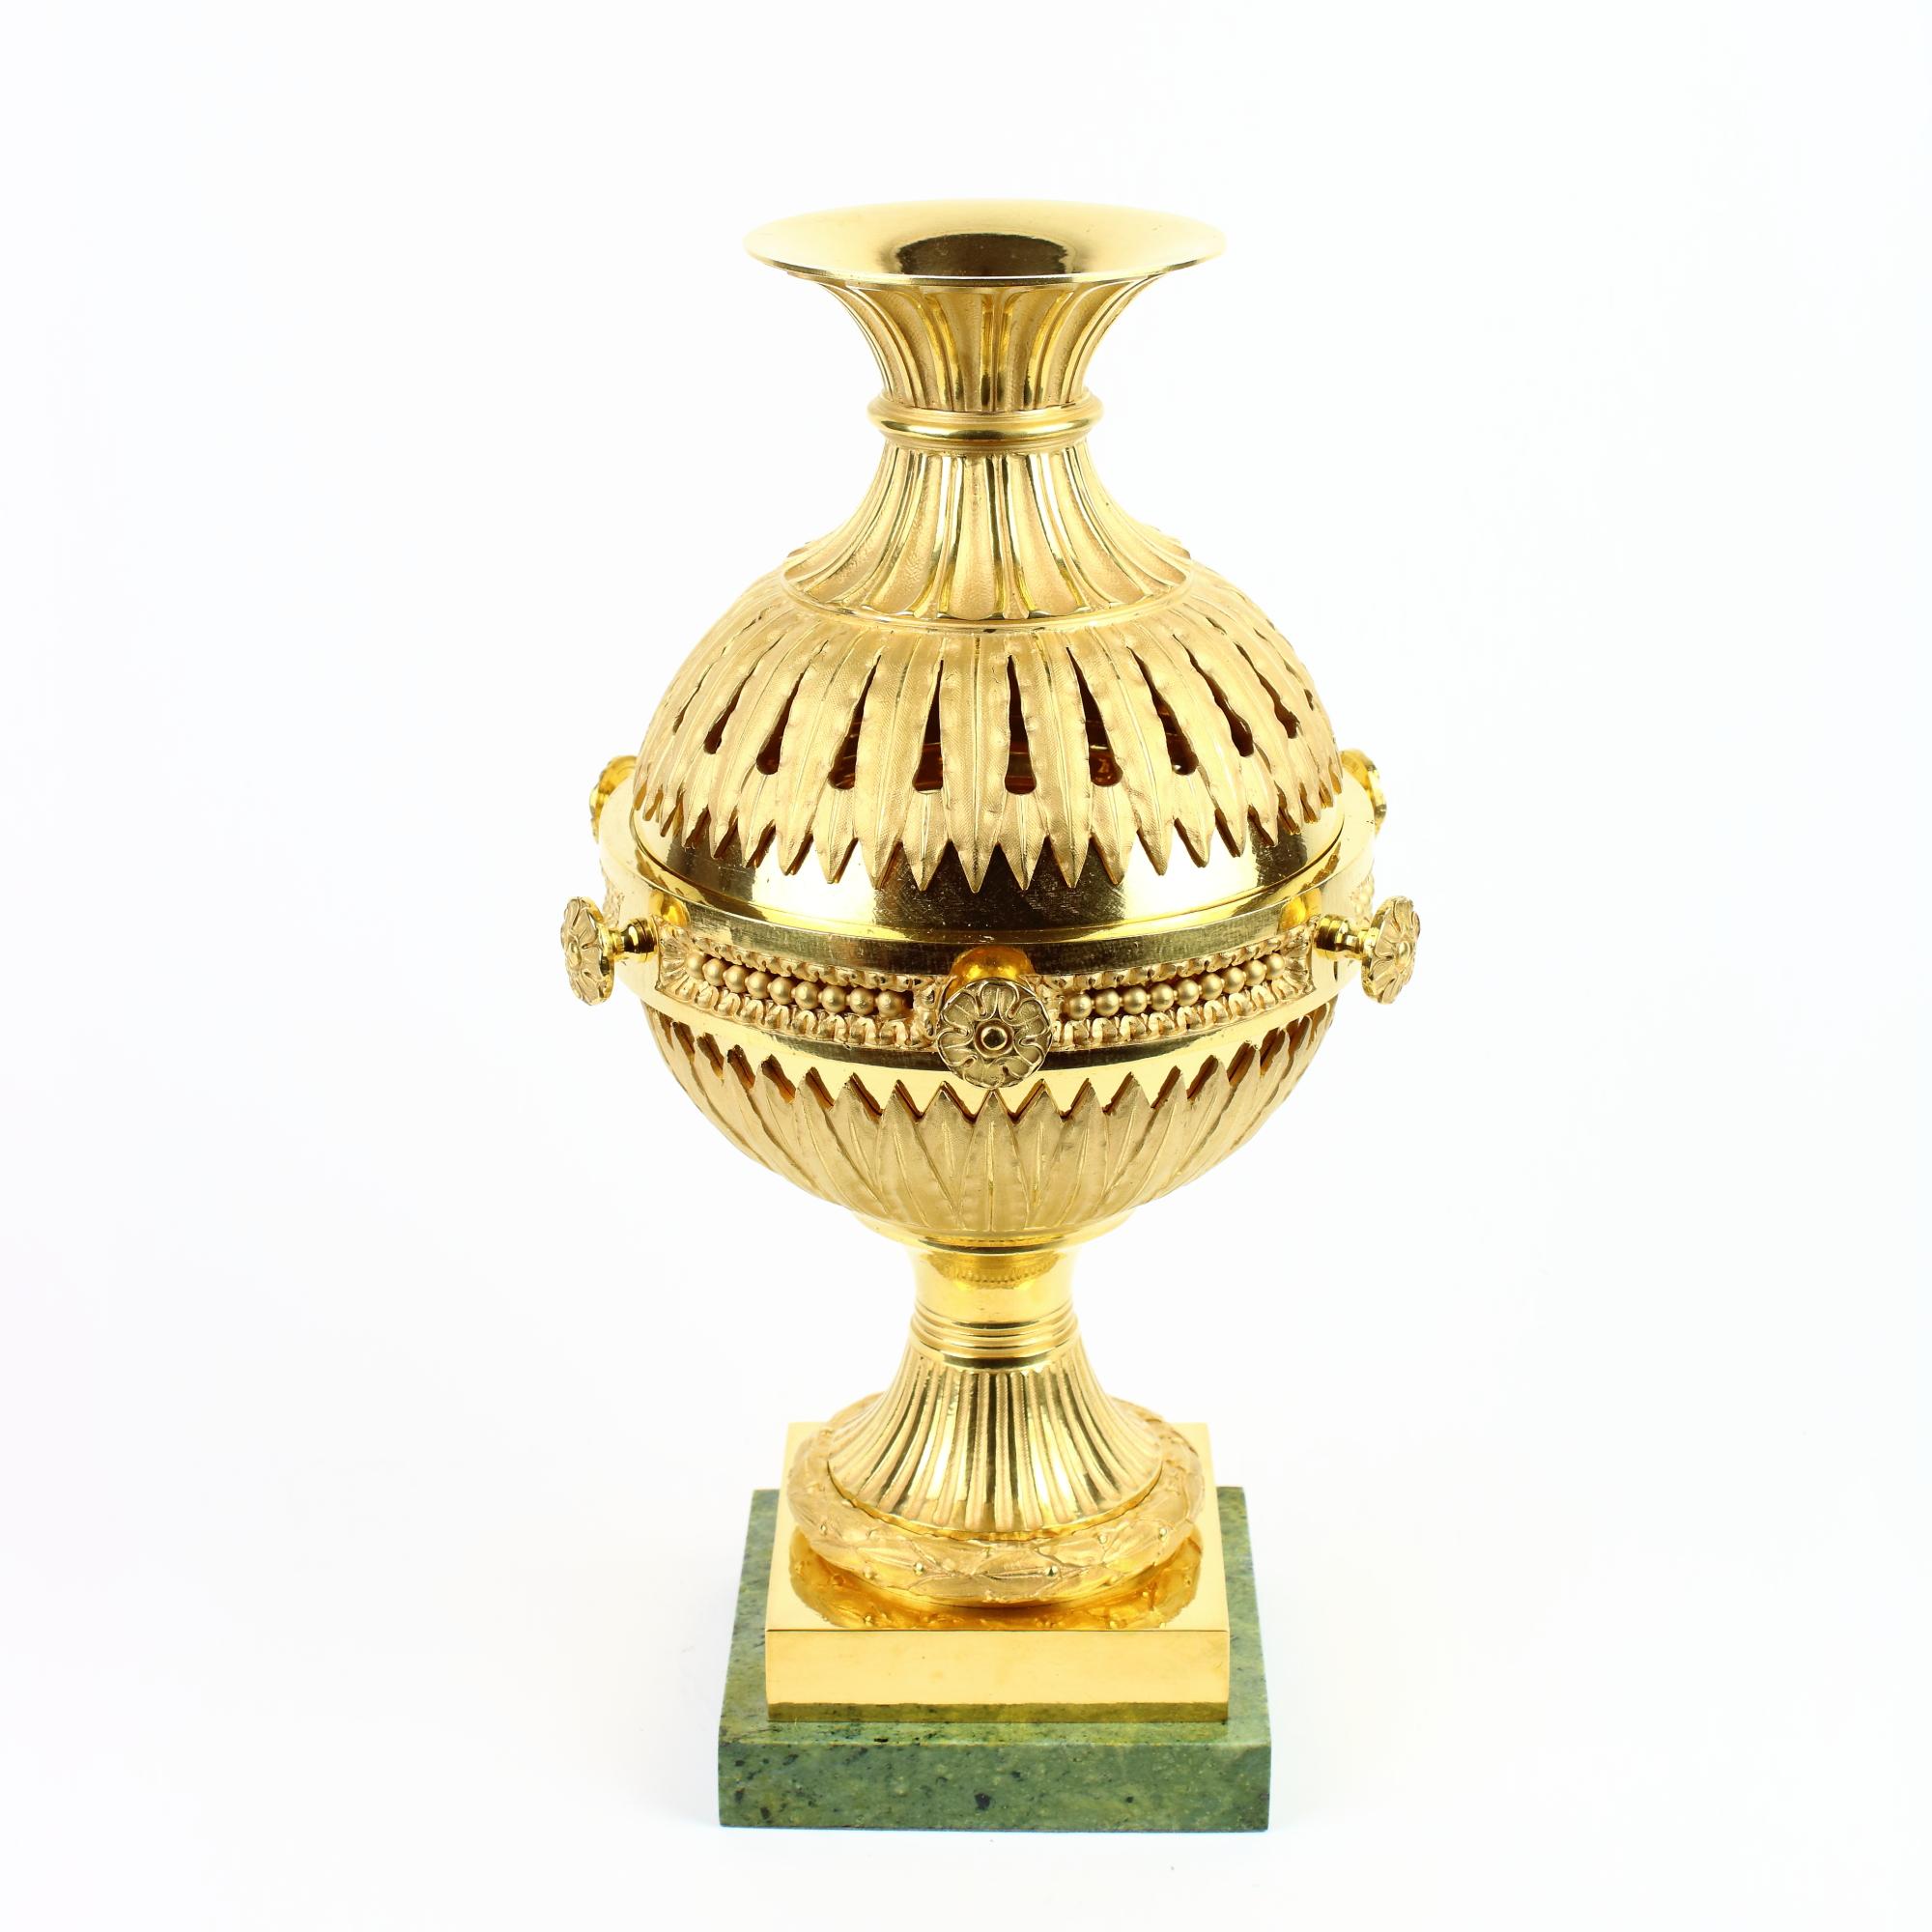 French Late 18thh Century Louis XVI Gilt Bronze Incense Burner or Brule Parfum For Sale 2